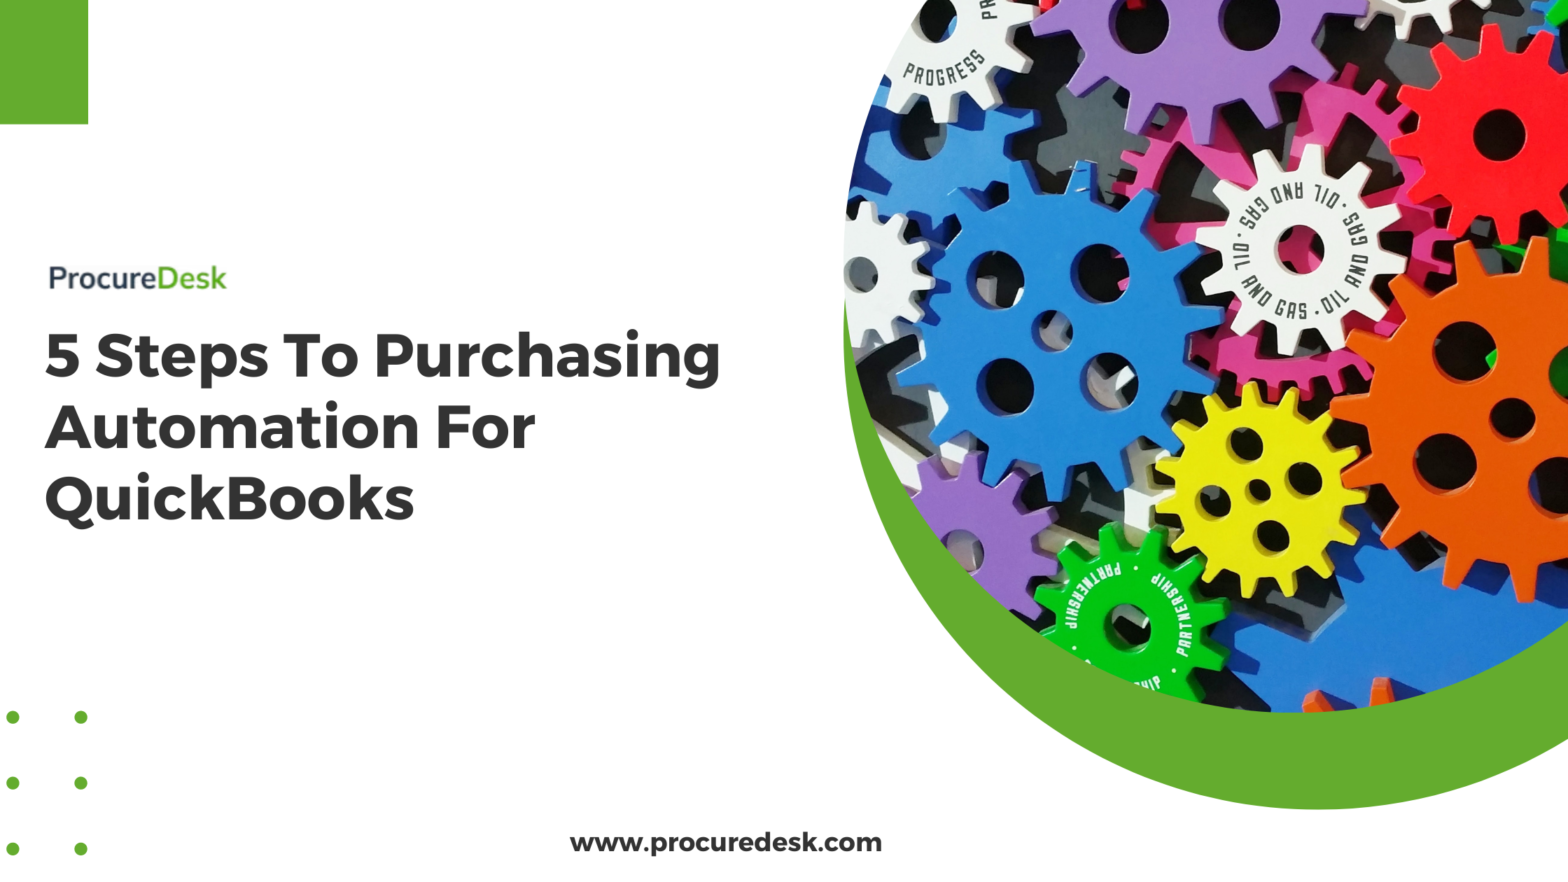 5 Steps To Purchasing Automation For QuickBooks